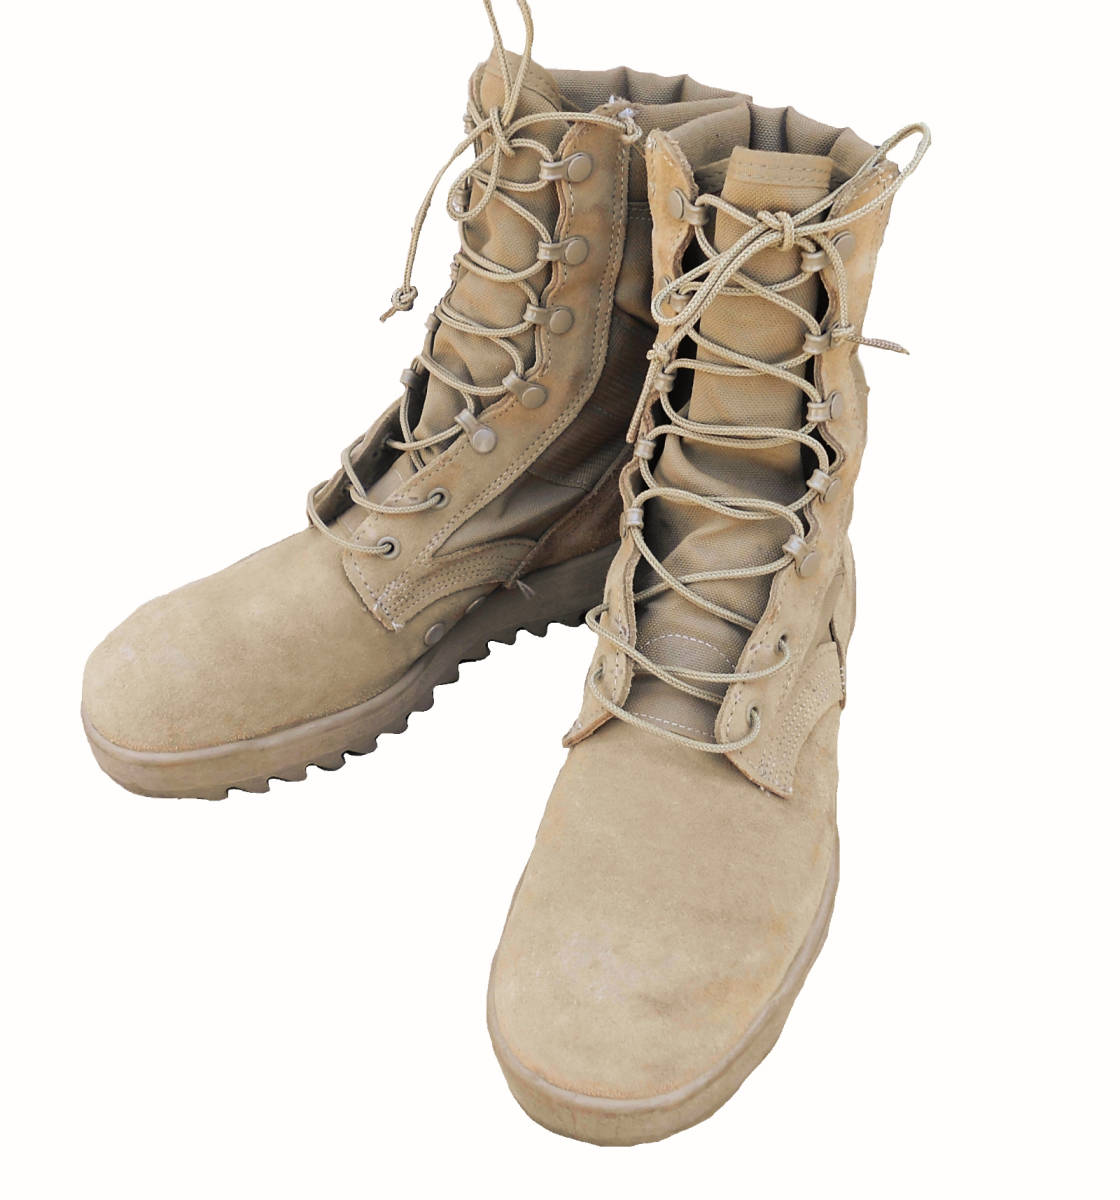 [2811] the truth thing US ARMY beautiful goods America land army Jean gru boots desert color TAN America made US size 10.5R(28.5cm)